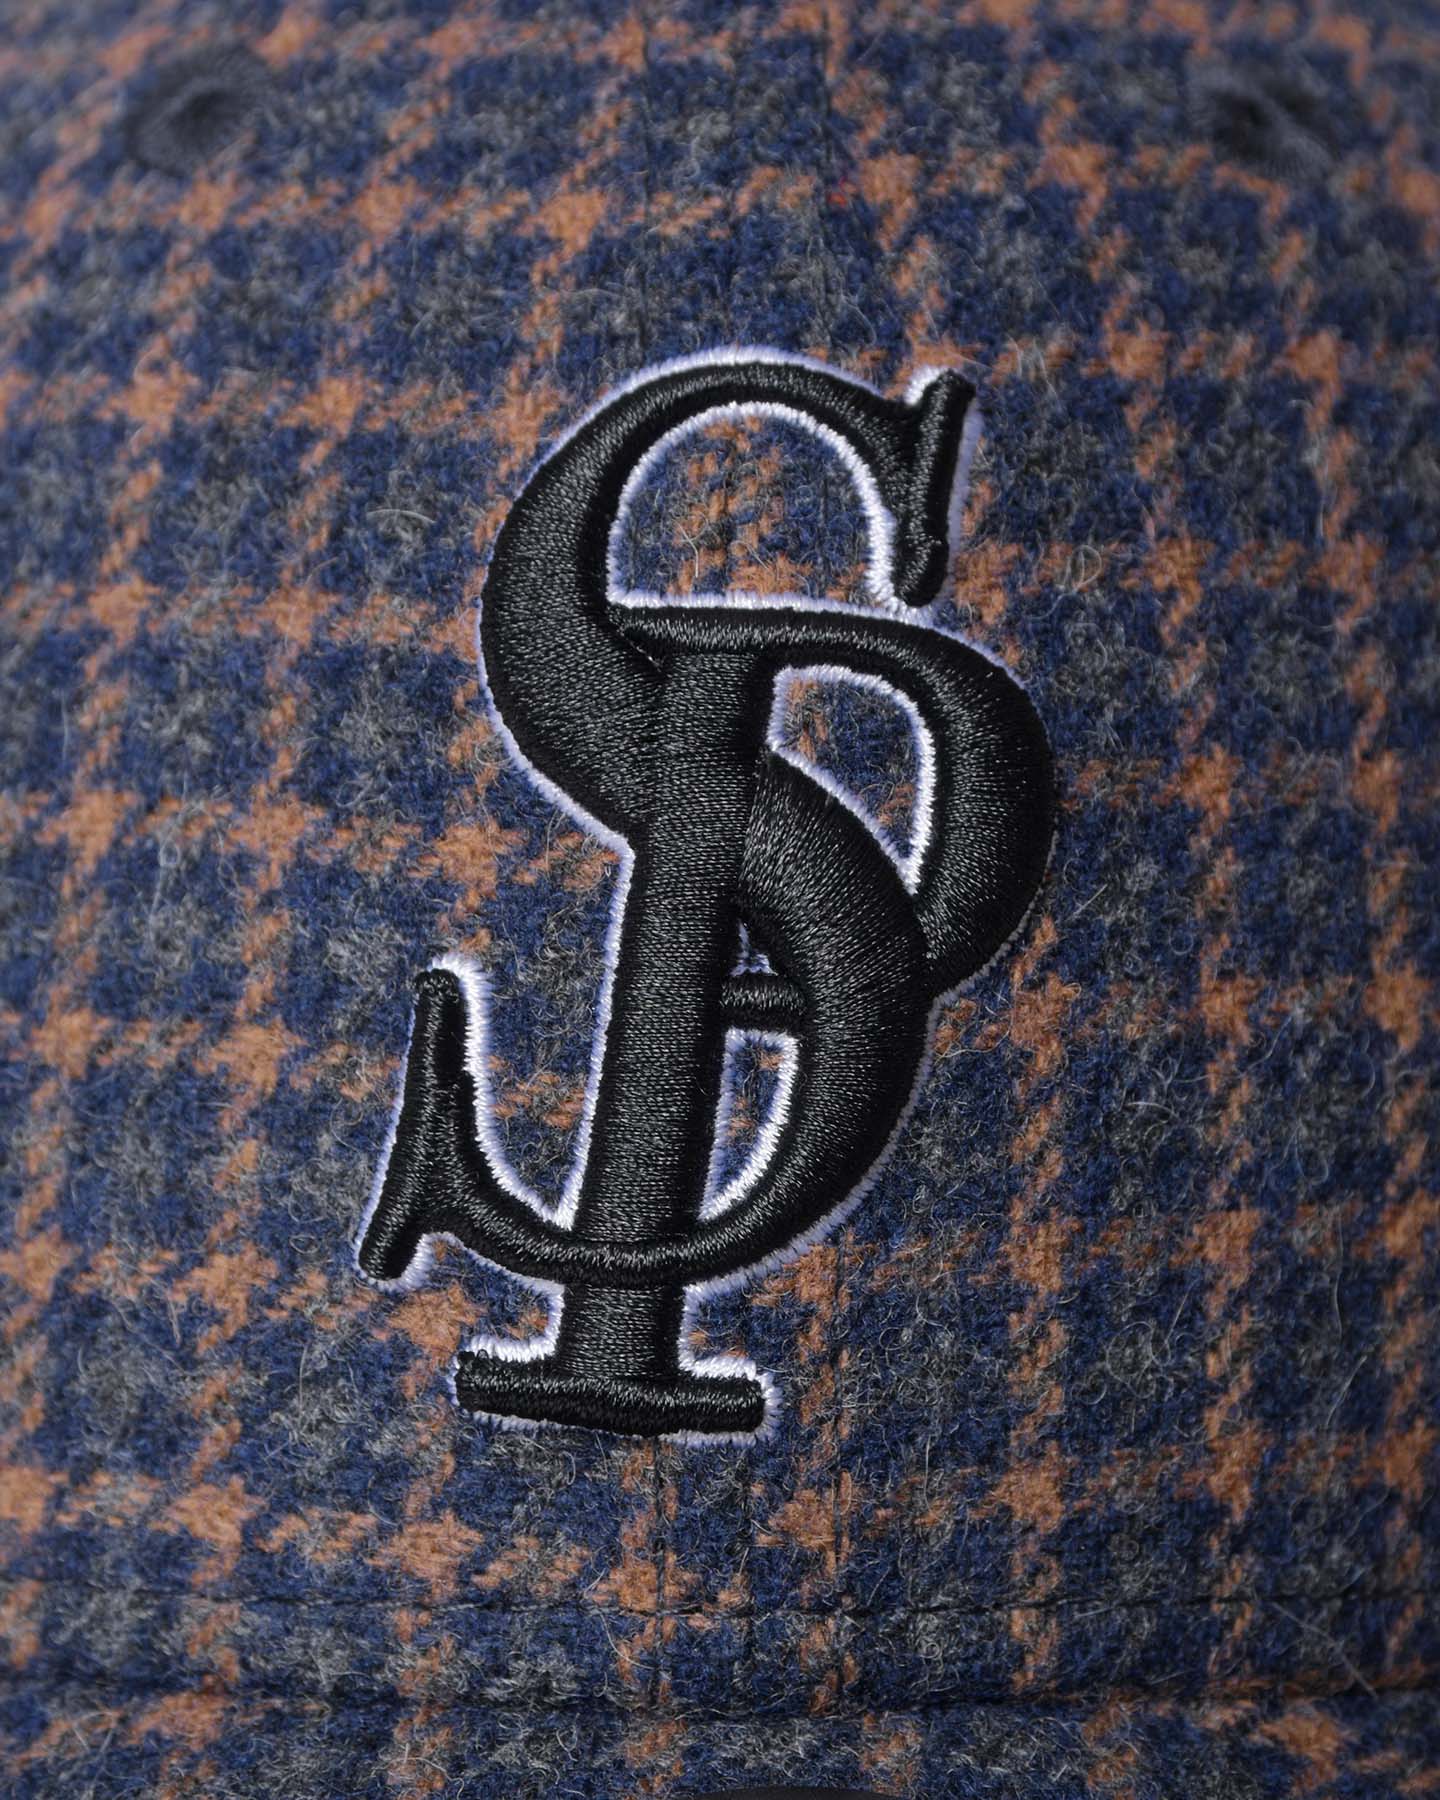 SOPH. | NEW ERA BLENDED WOOL 9FORTY CAP(FREE NAVY CHECK):